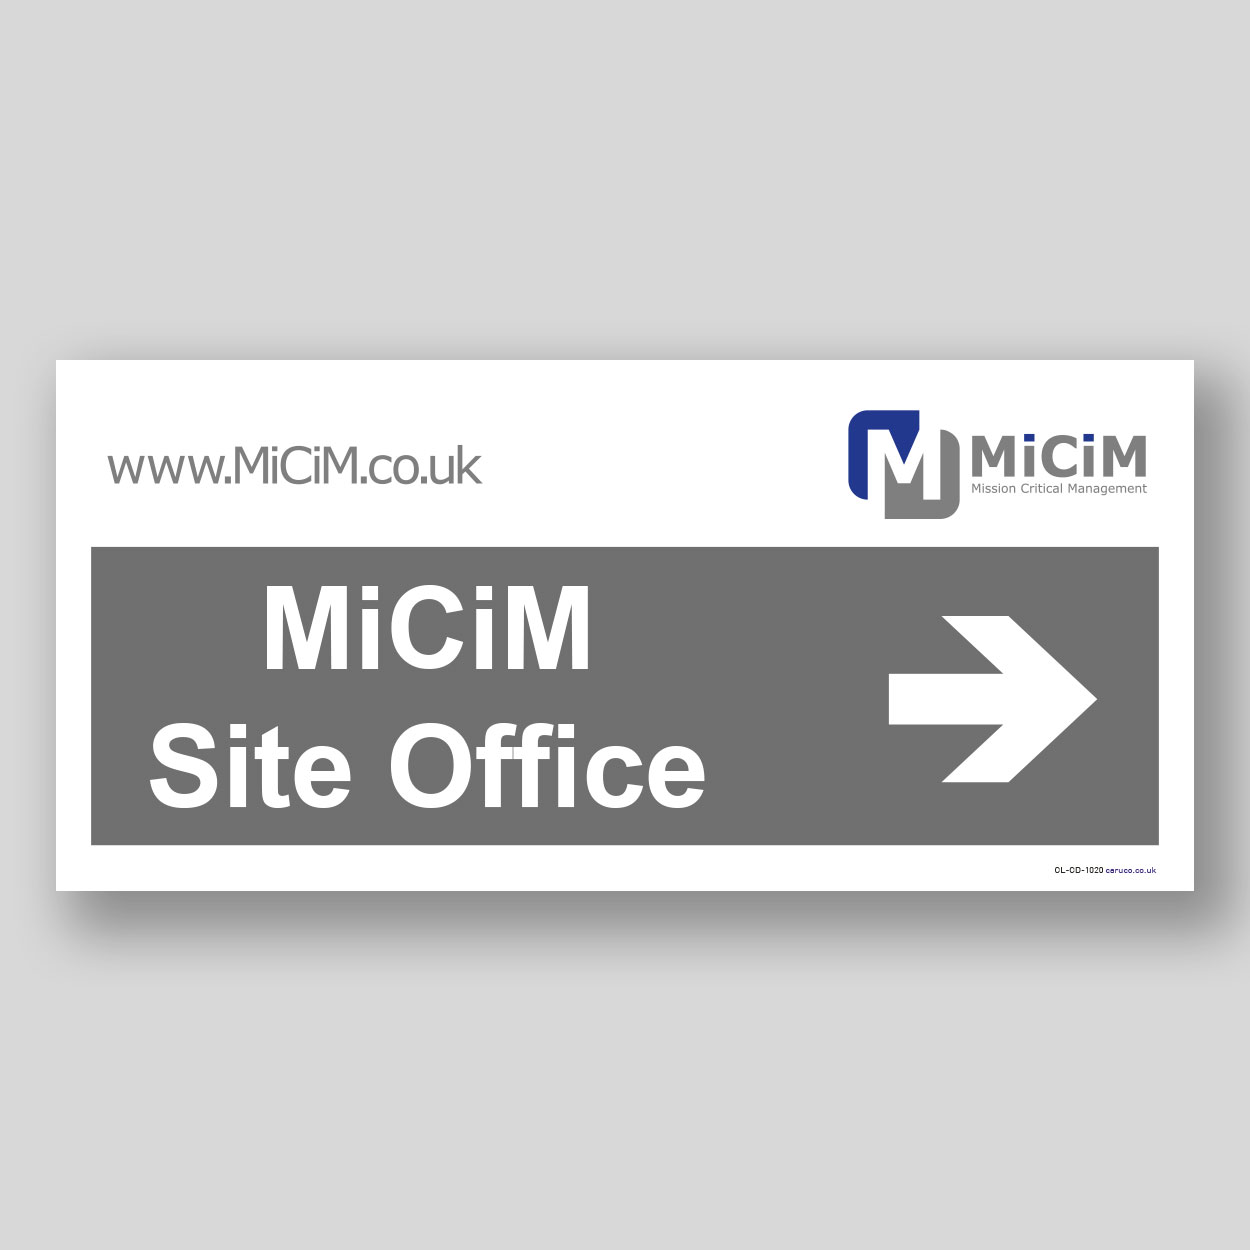 CL-CD-1020 MiCiM site office with right arrow